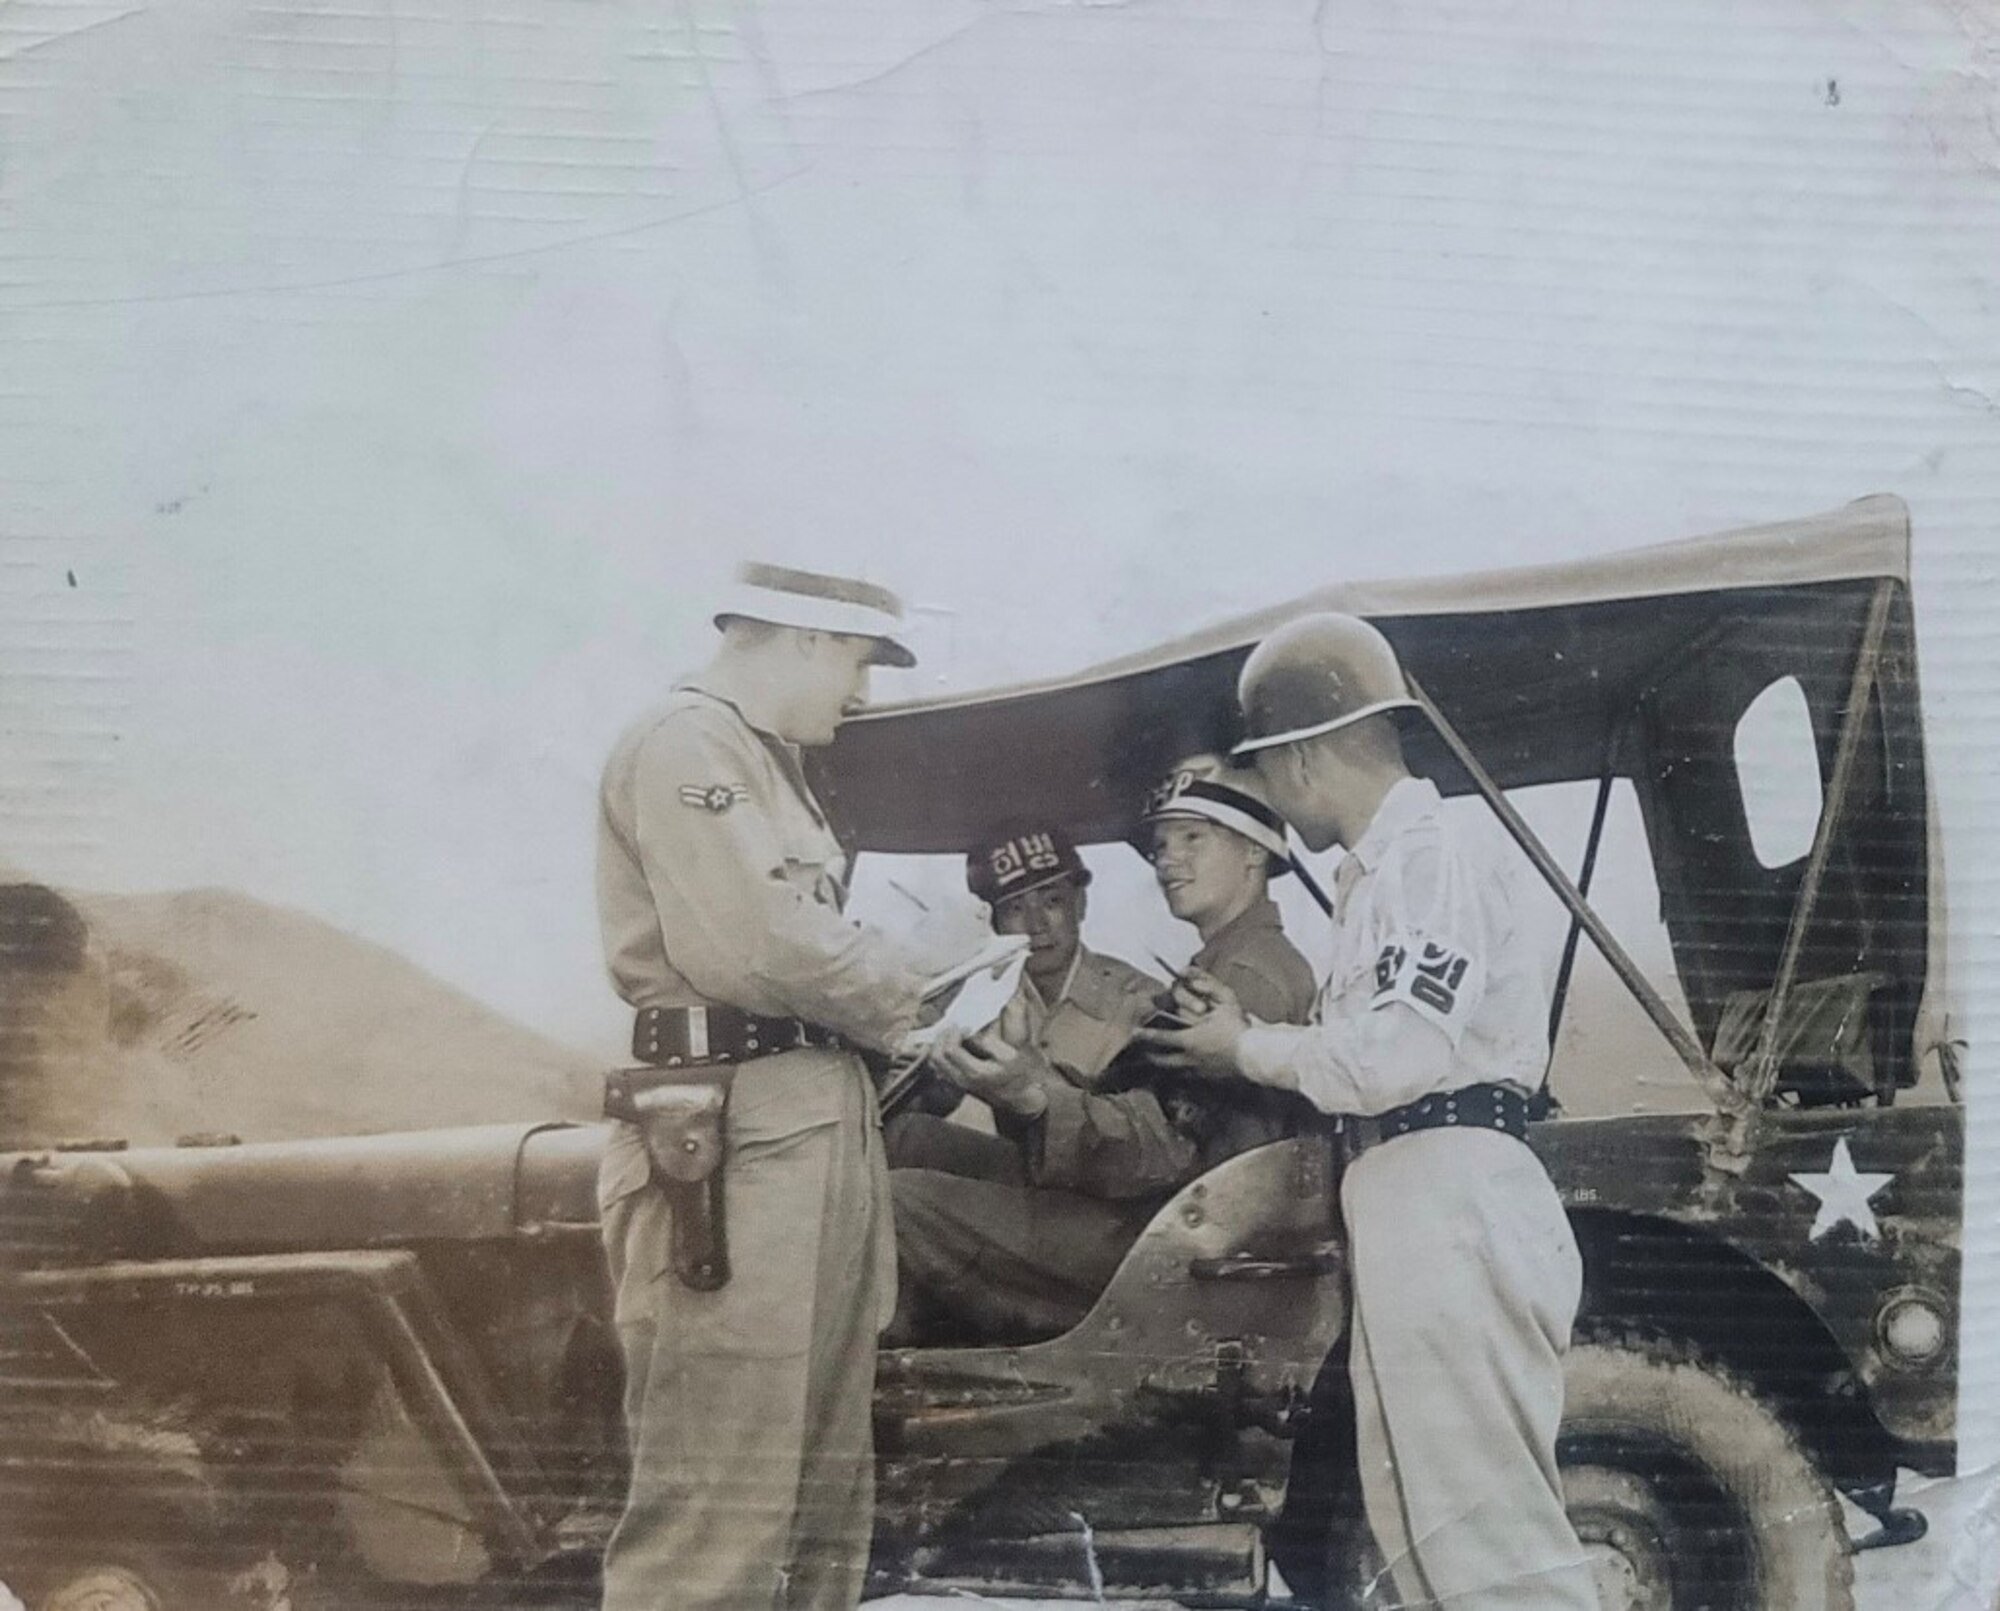 Republic of Korea Air Force and U.S. Air Force Military Police service members work together in South Korea some time after 1953, following the end of the Korean War.